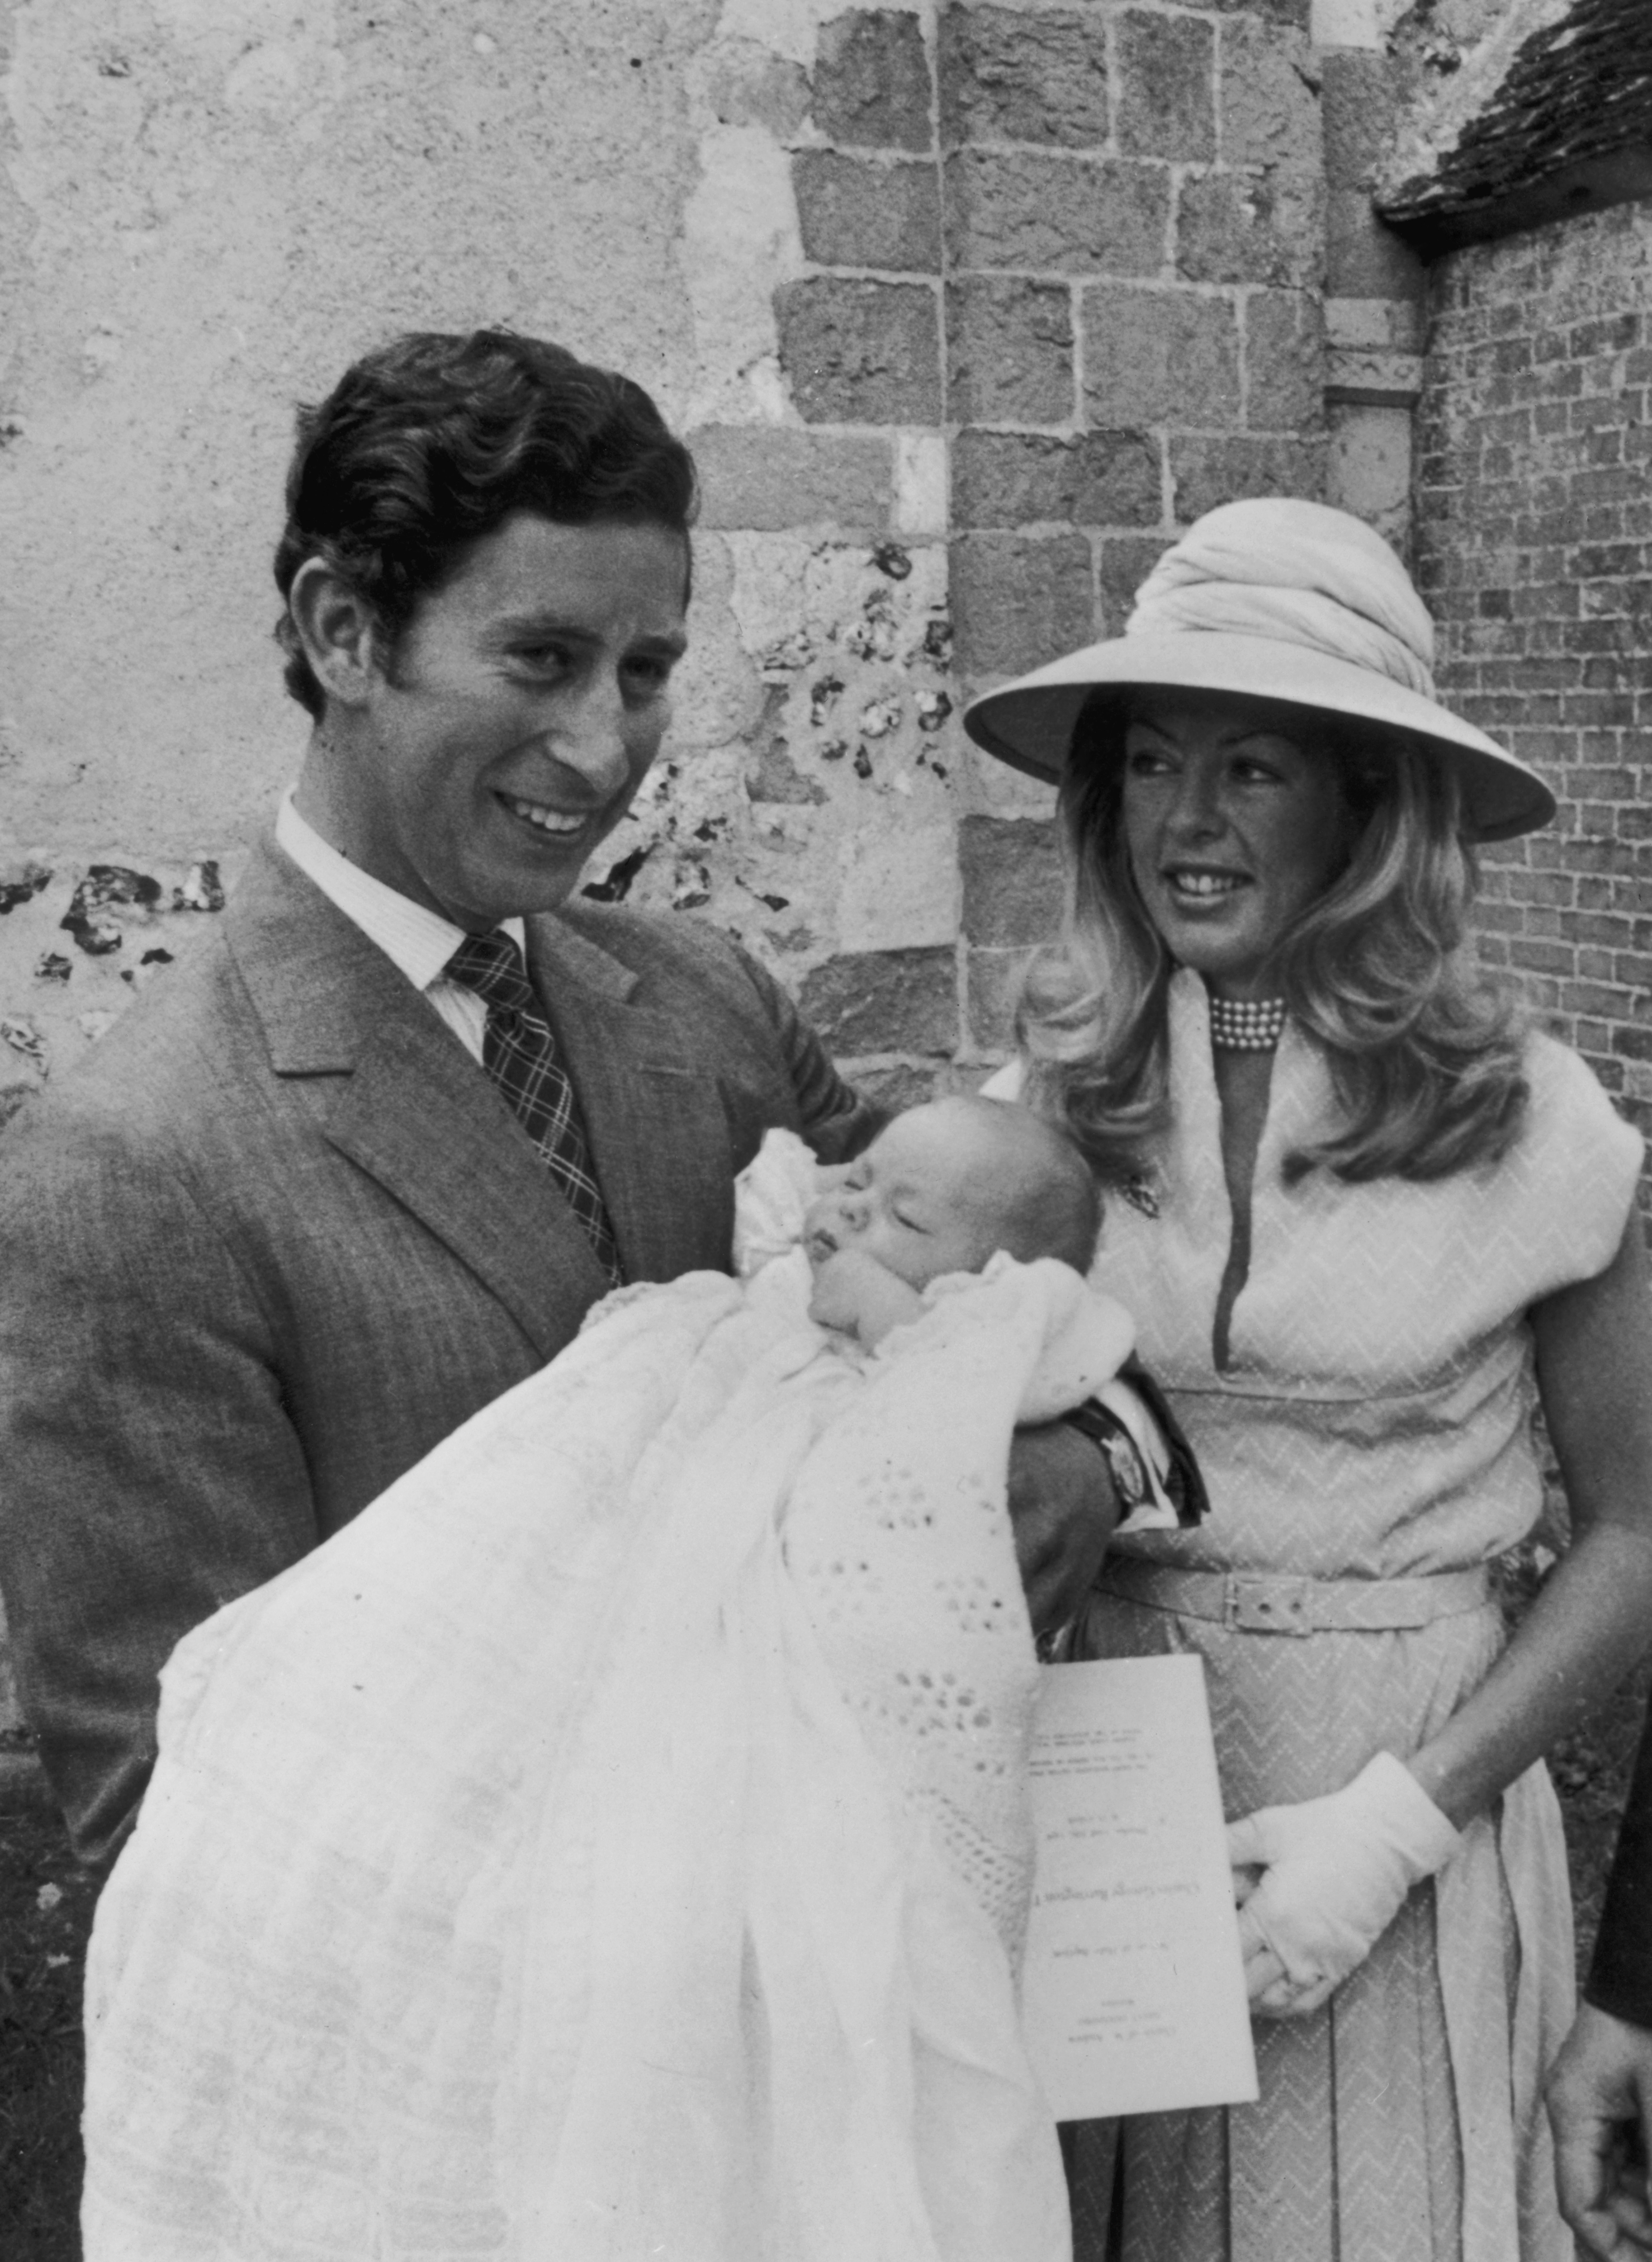 Prince Charles holds his 9-week-old godson, Charles George Barrington Tryon, after the boy's baptism in Durnford, Wiltshire, on July 23, 1976. With them is the child's mother, Dale Tryon. | Source: Getty Images